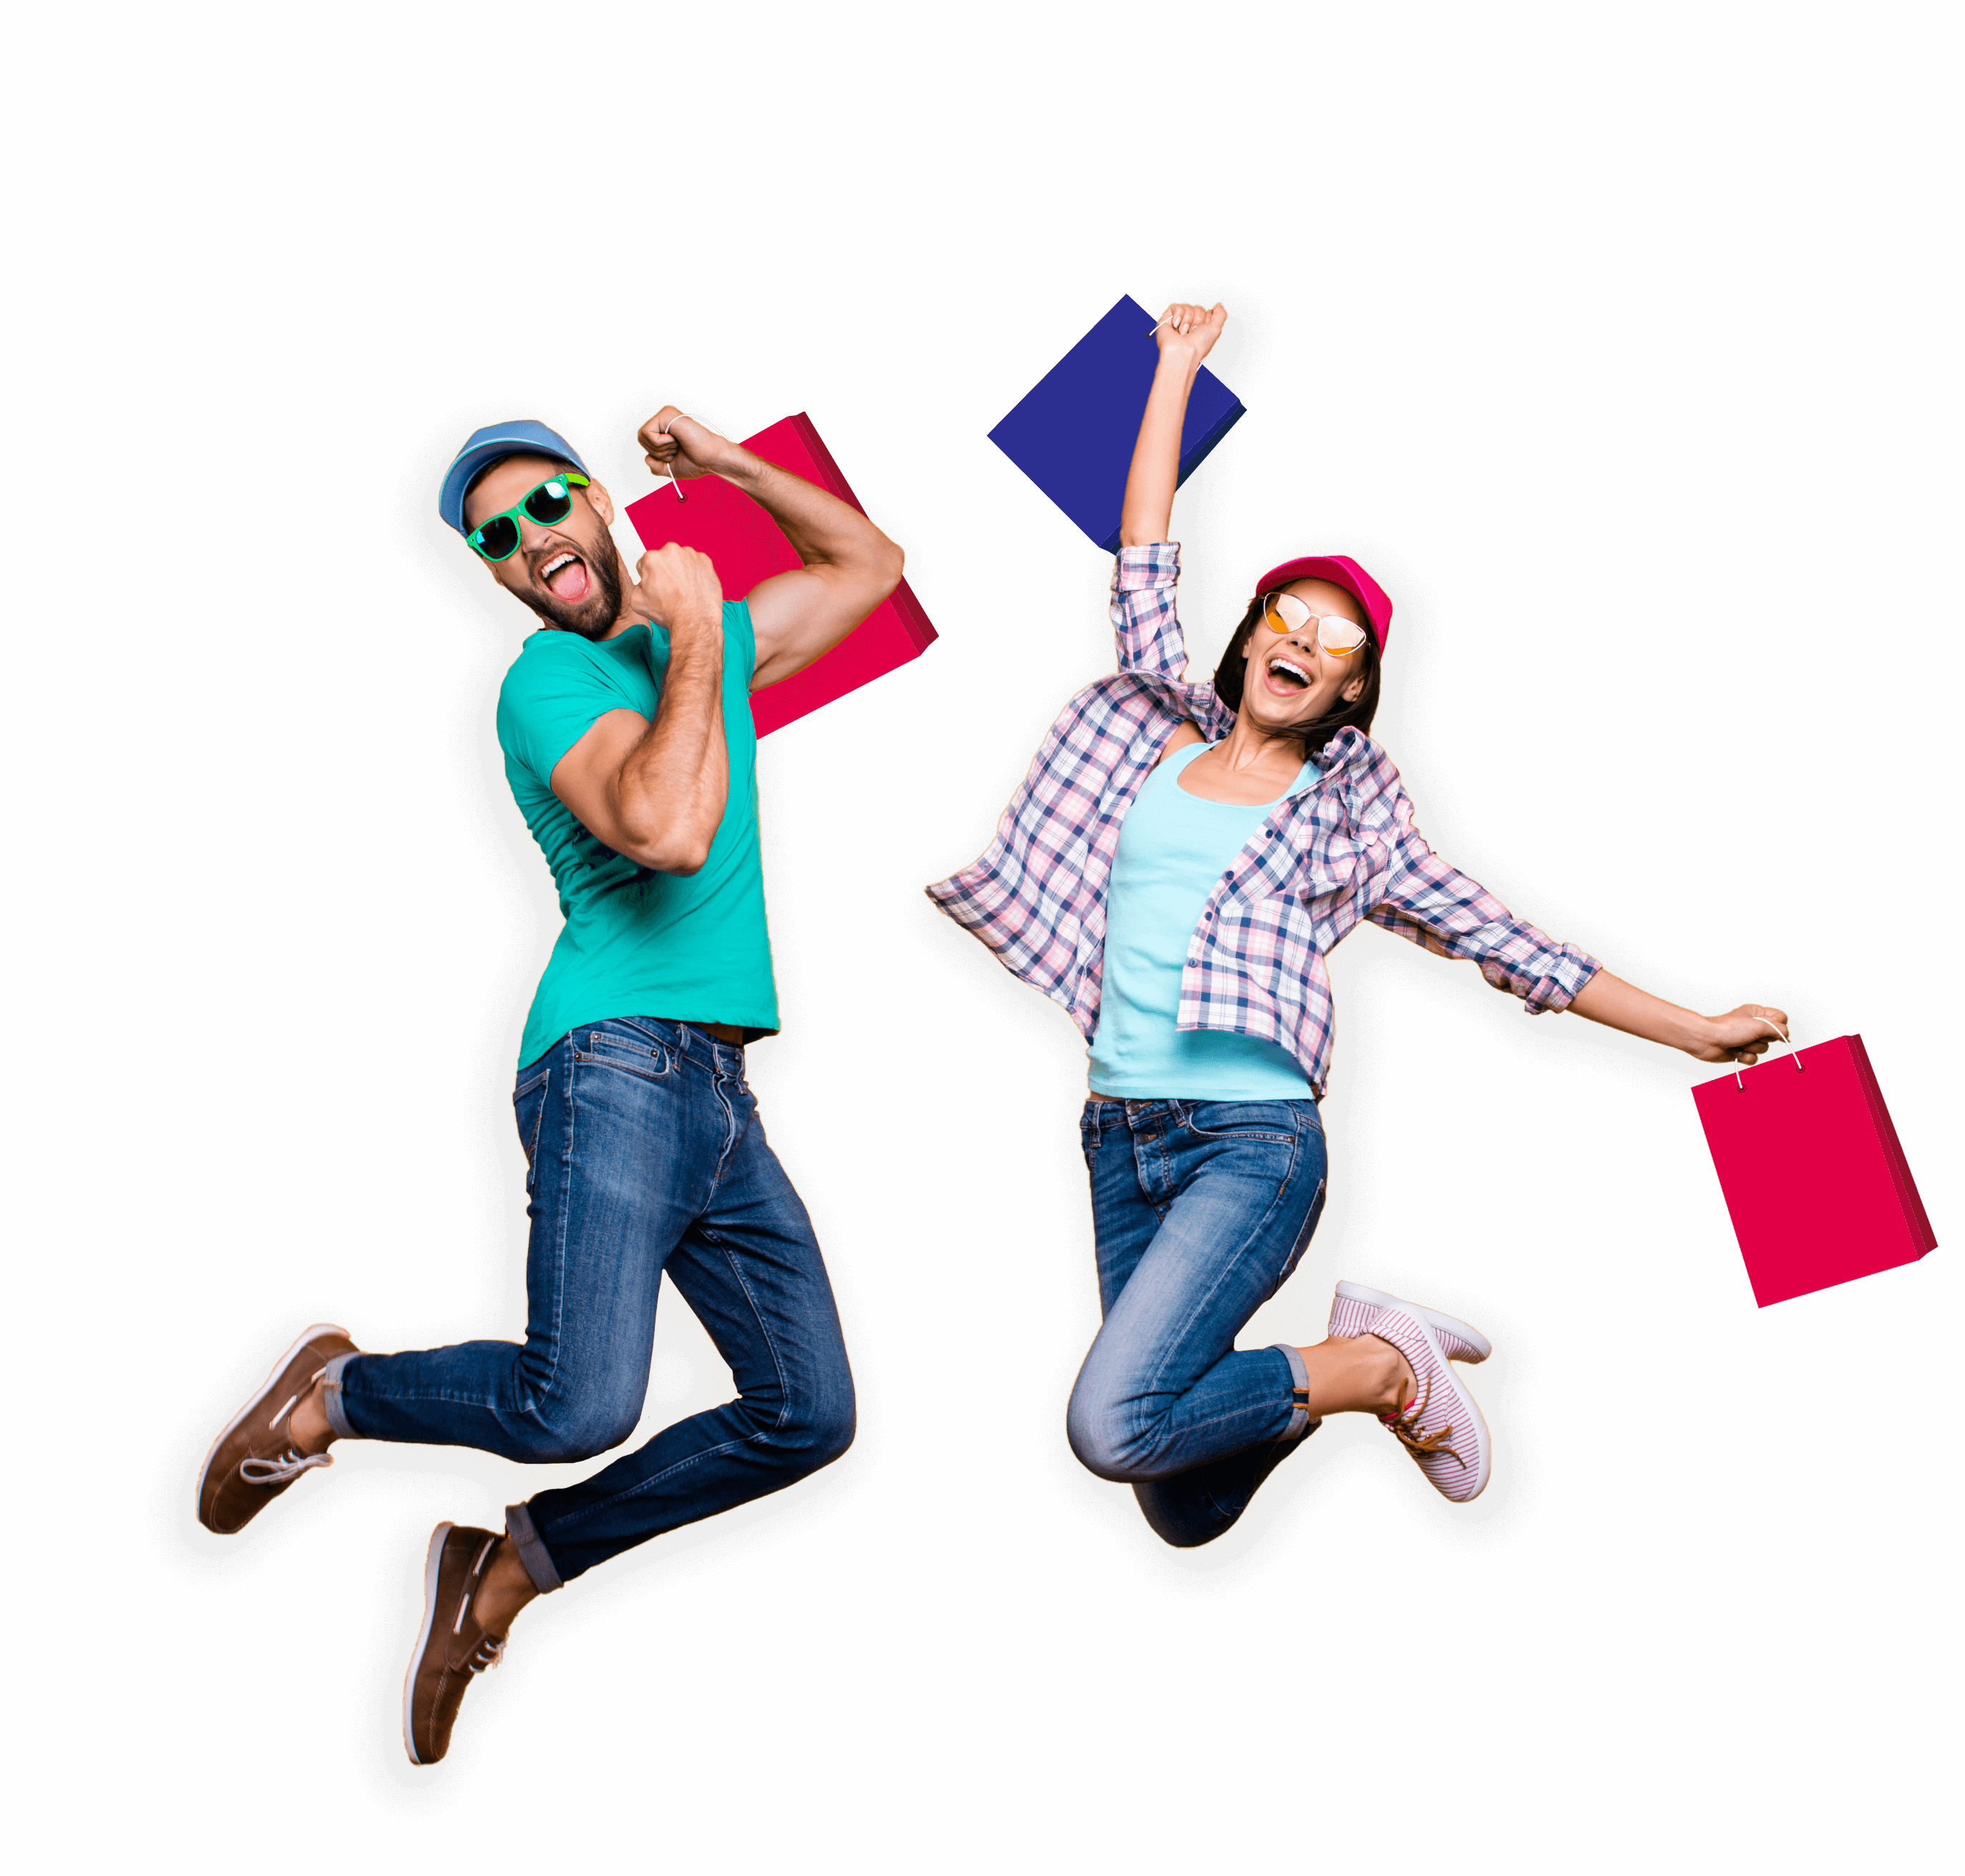 A stock image of models with shopping bags